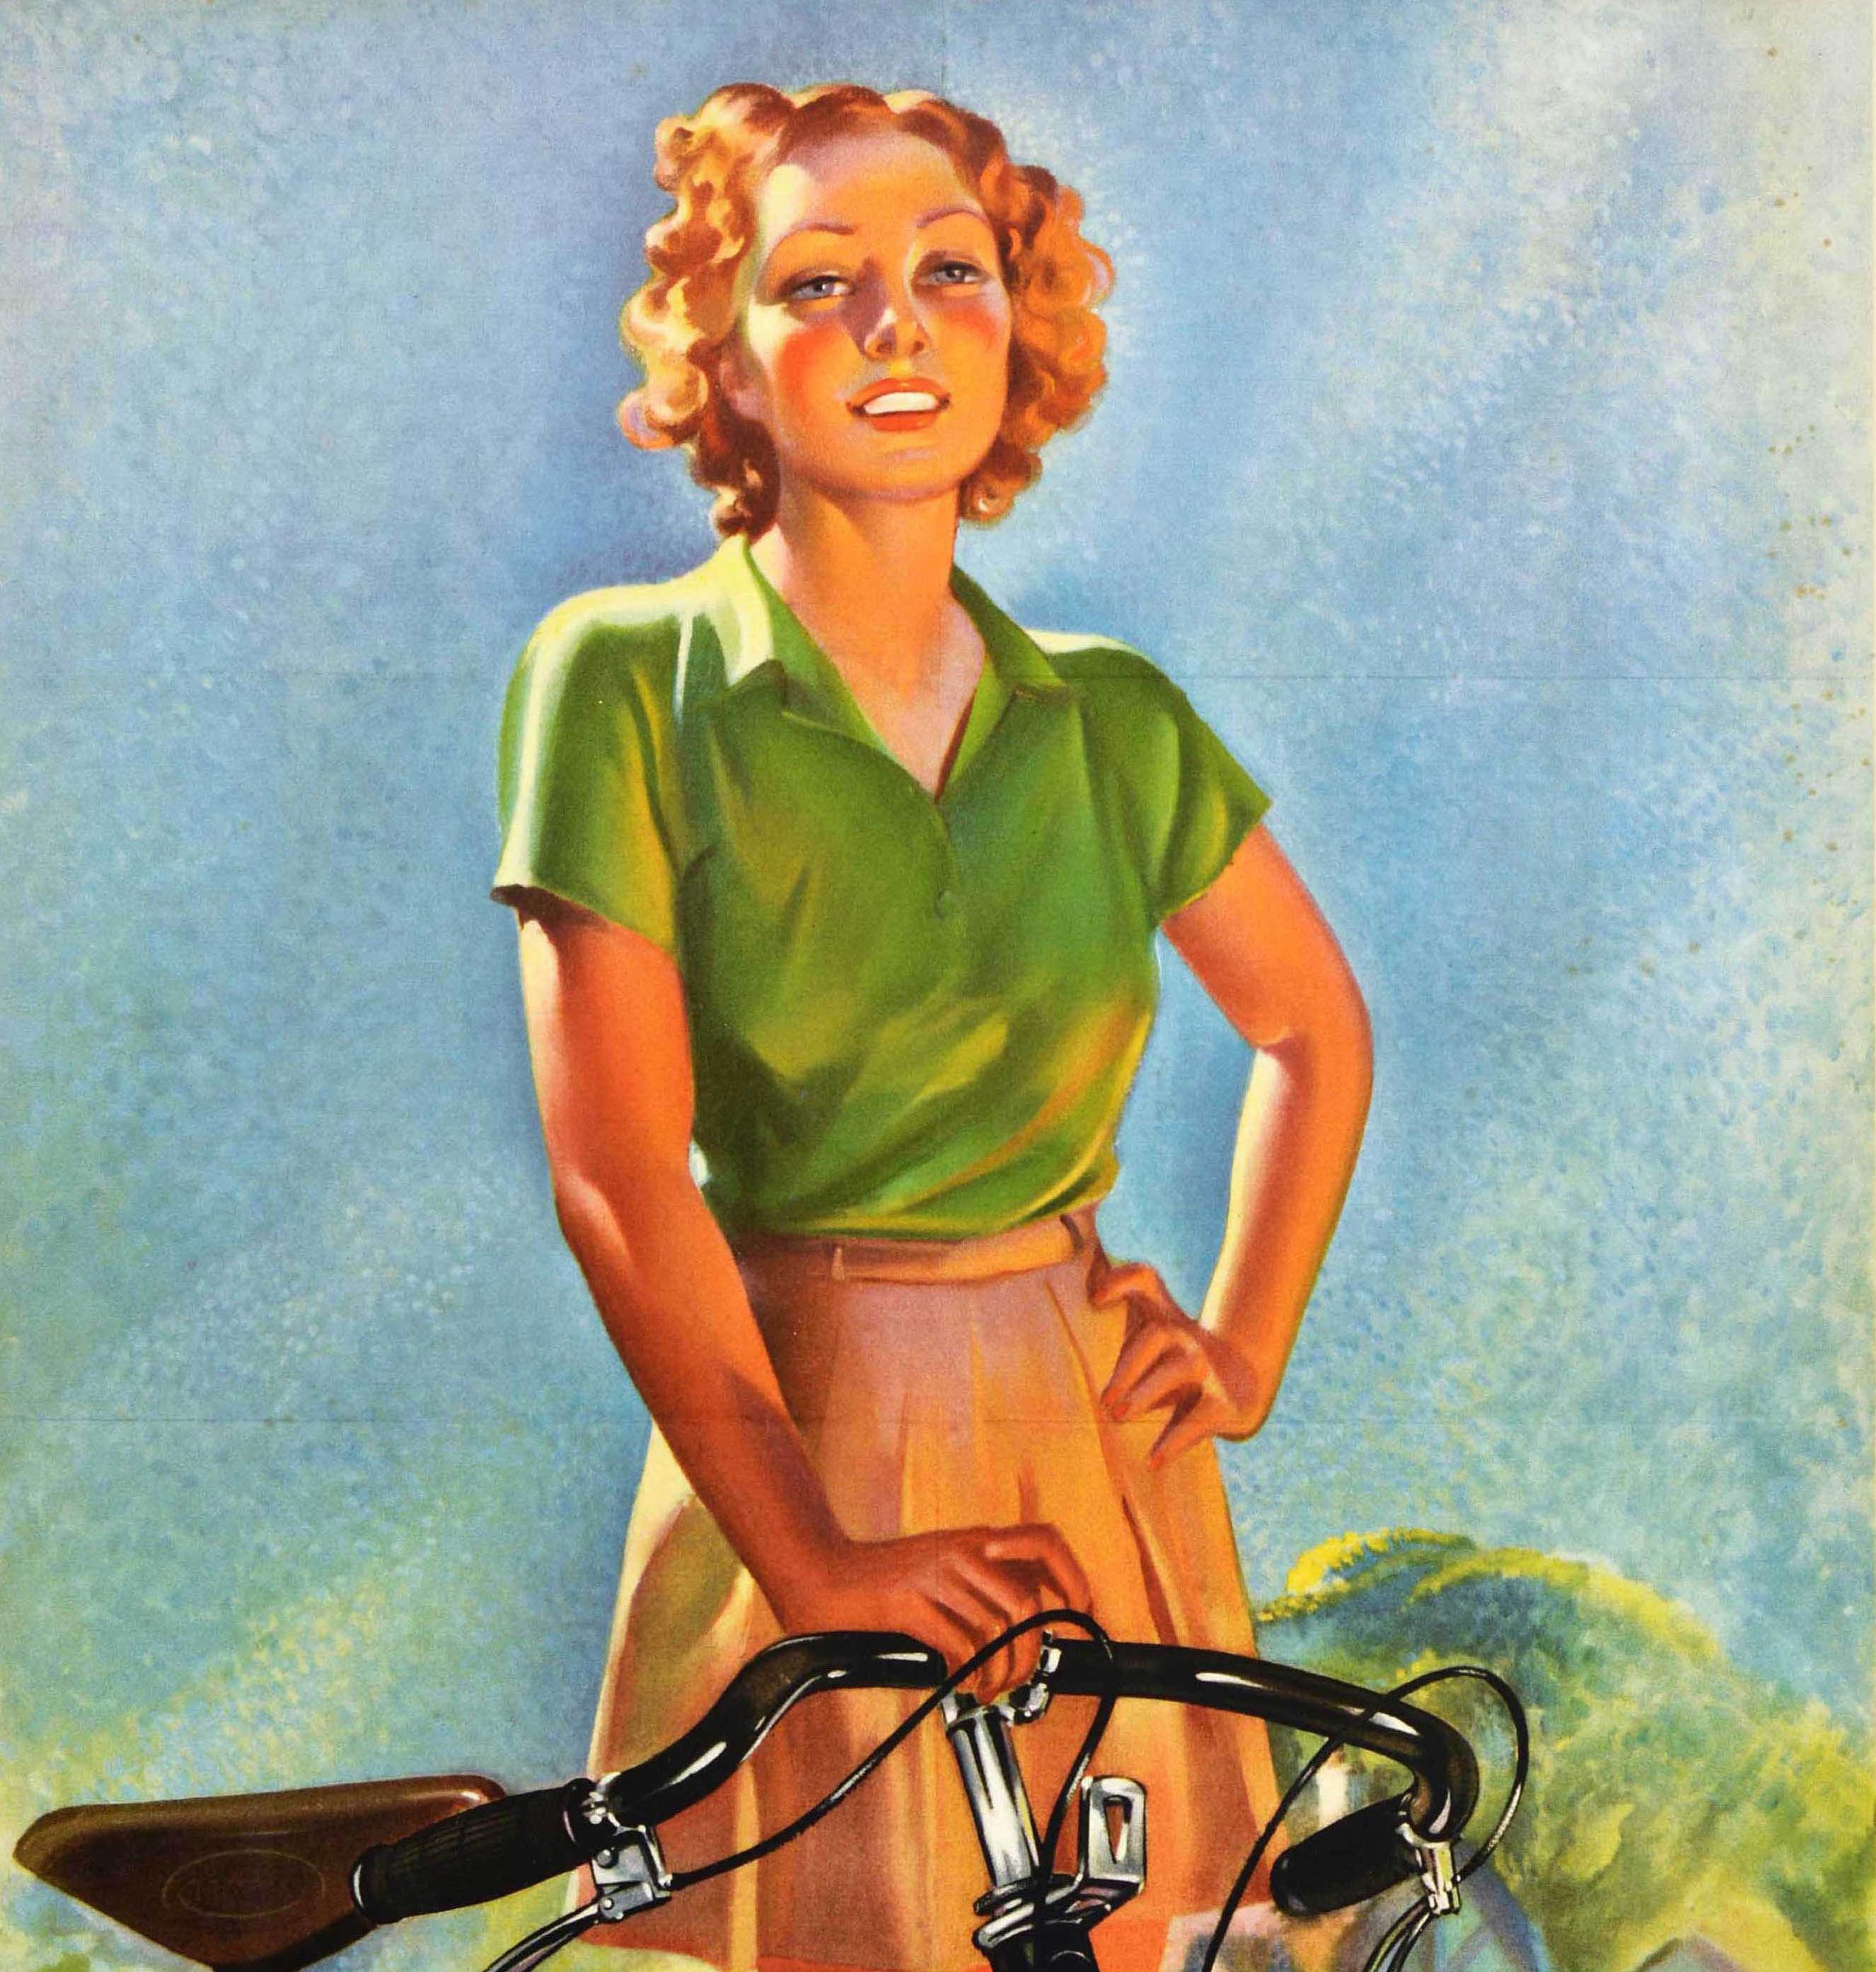 Original Vintage Advertising Poster BSA The Real Quality Bicycle Design Art - Print by Unknown